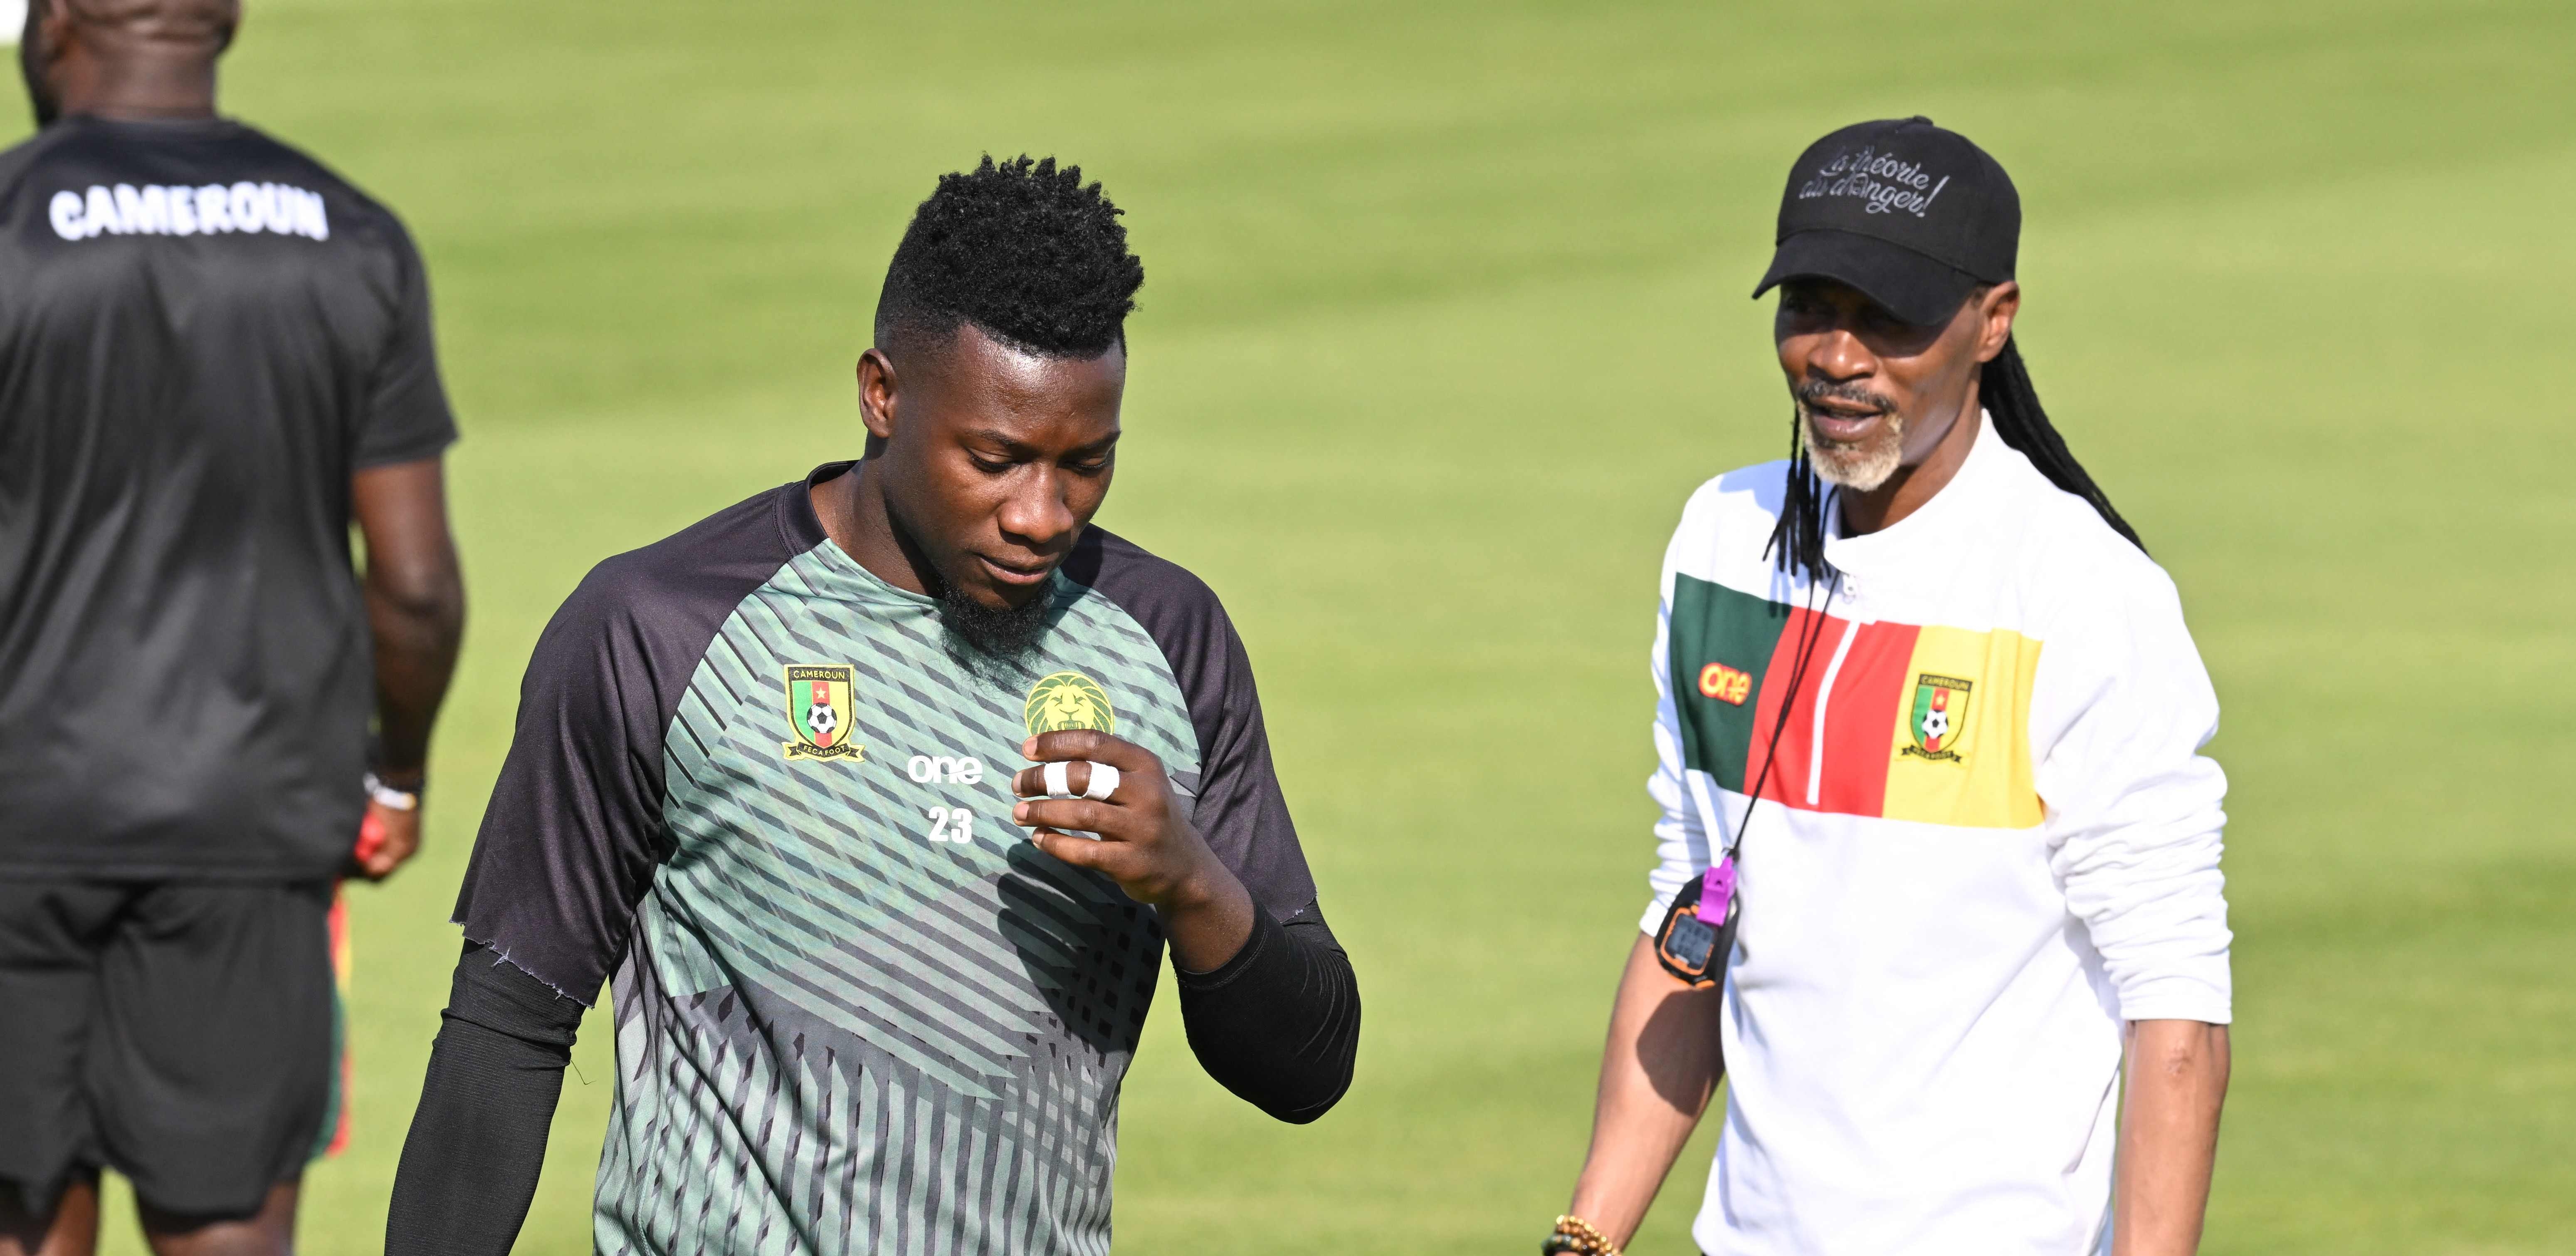 Cameroon's head coach Rigobert Song (R) oversee a training session of his players including Cameroon's goalkeeper Andre Onana on November 27, 2022 at the Al Sailiya SC in Doha on the eve of a Qatar 2022 World Cup football match between Cameroon and Serbia. (Photo by ISSOUF SANOGO / AFP)